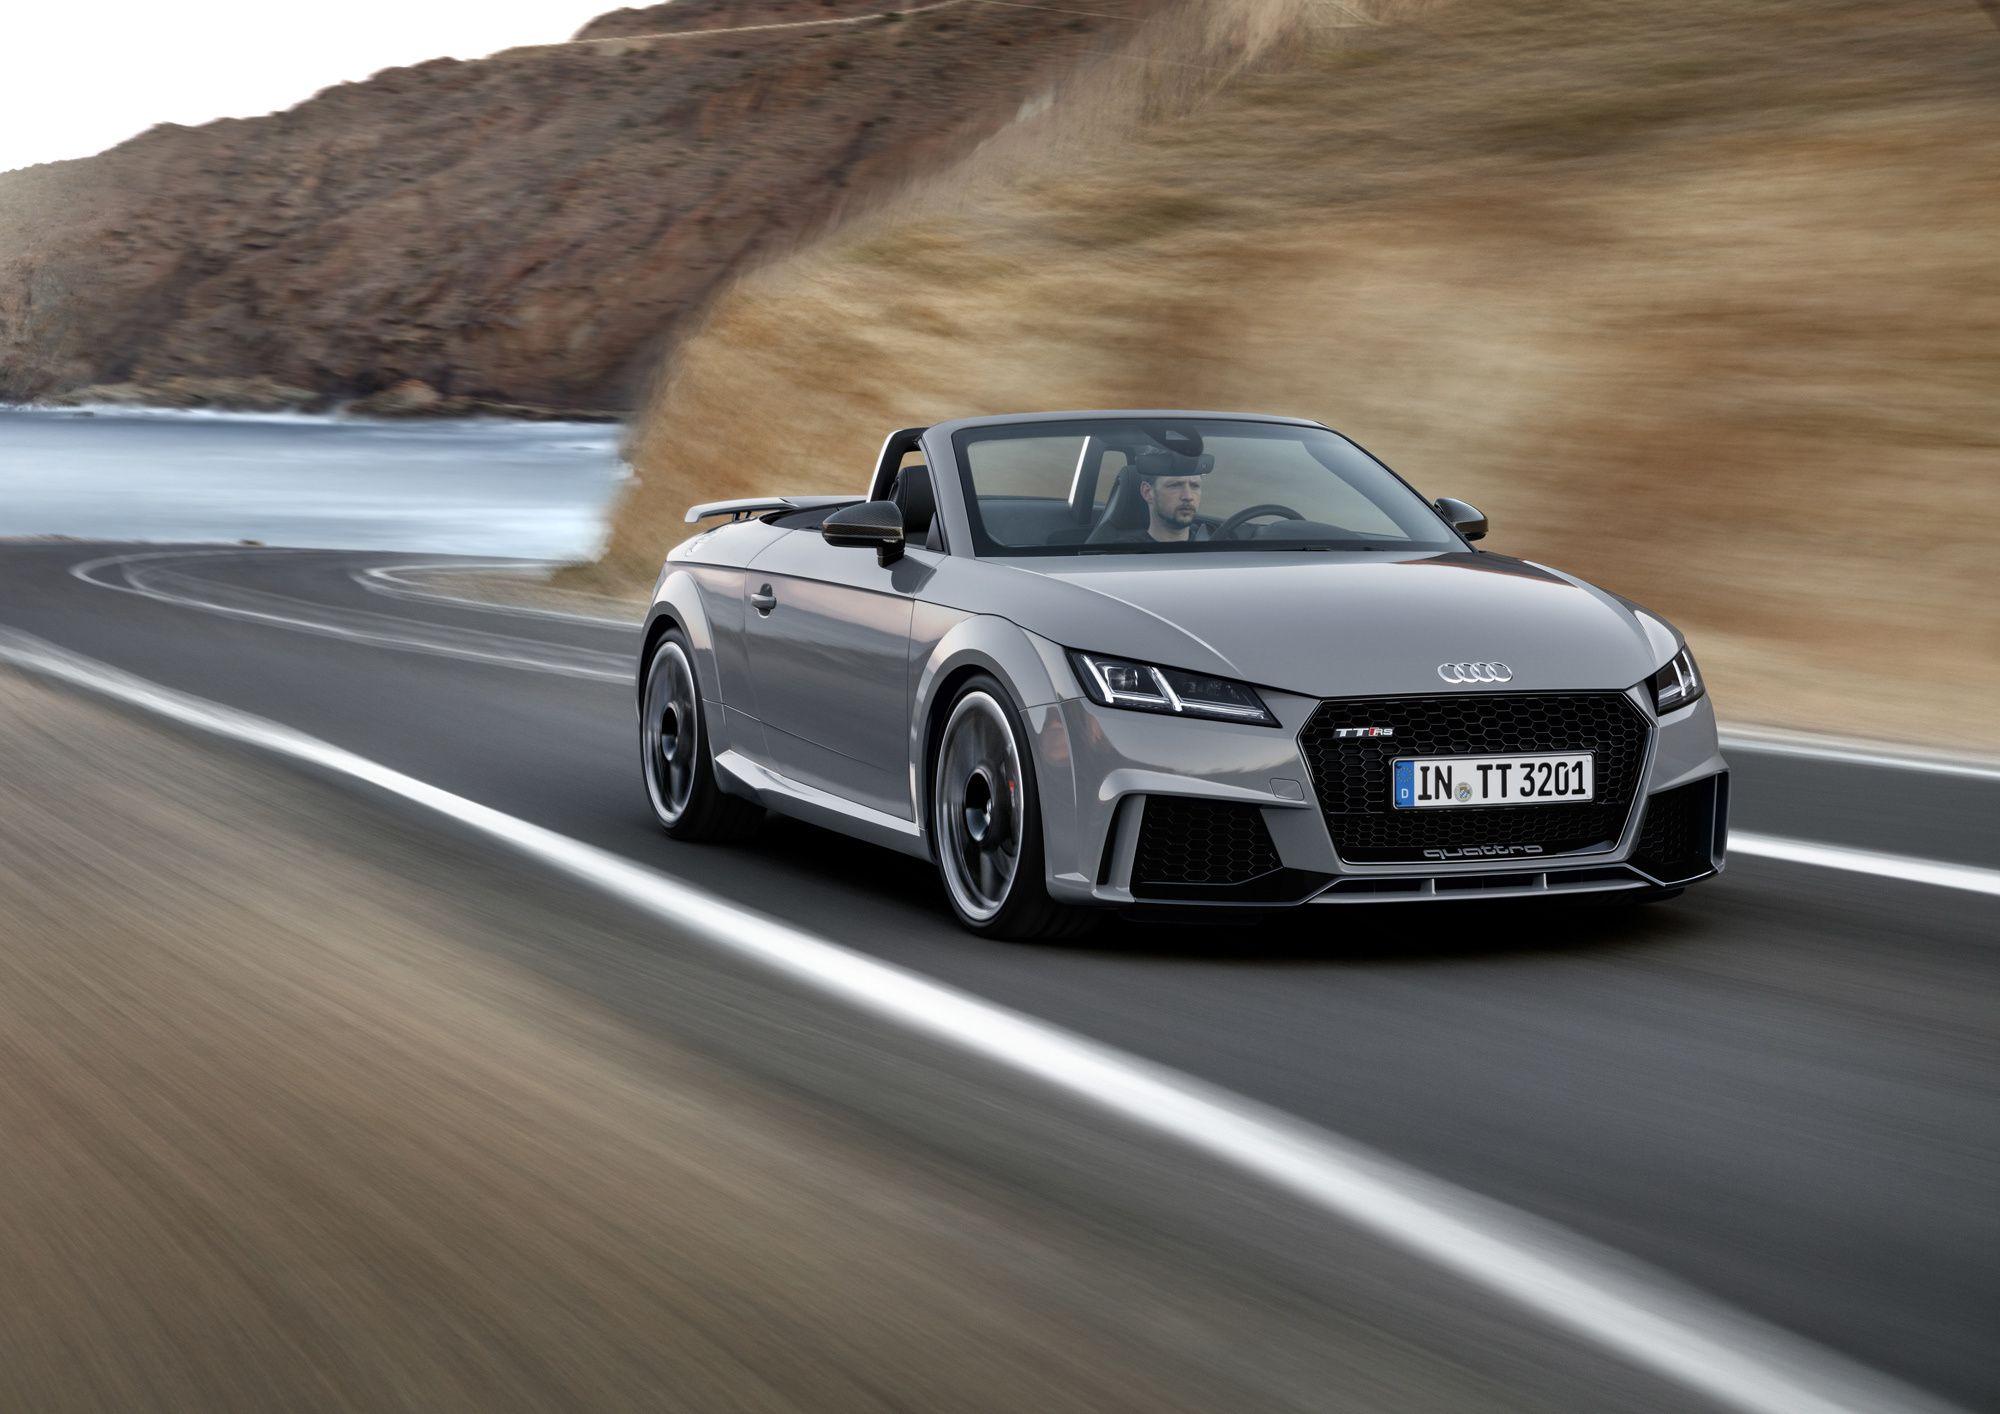 Audi TT RS Wallpaper Image Photo Picture Background